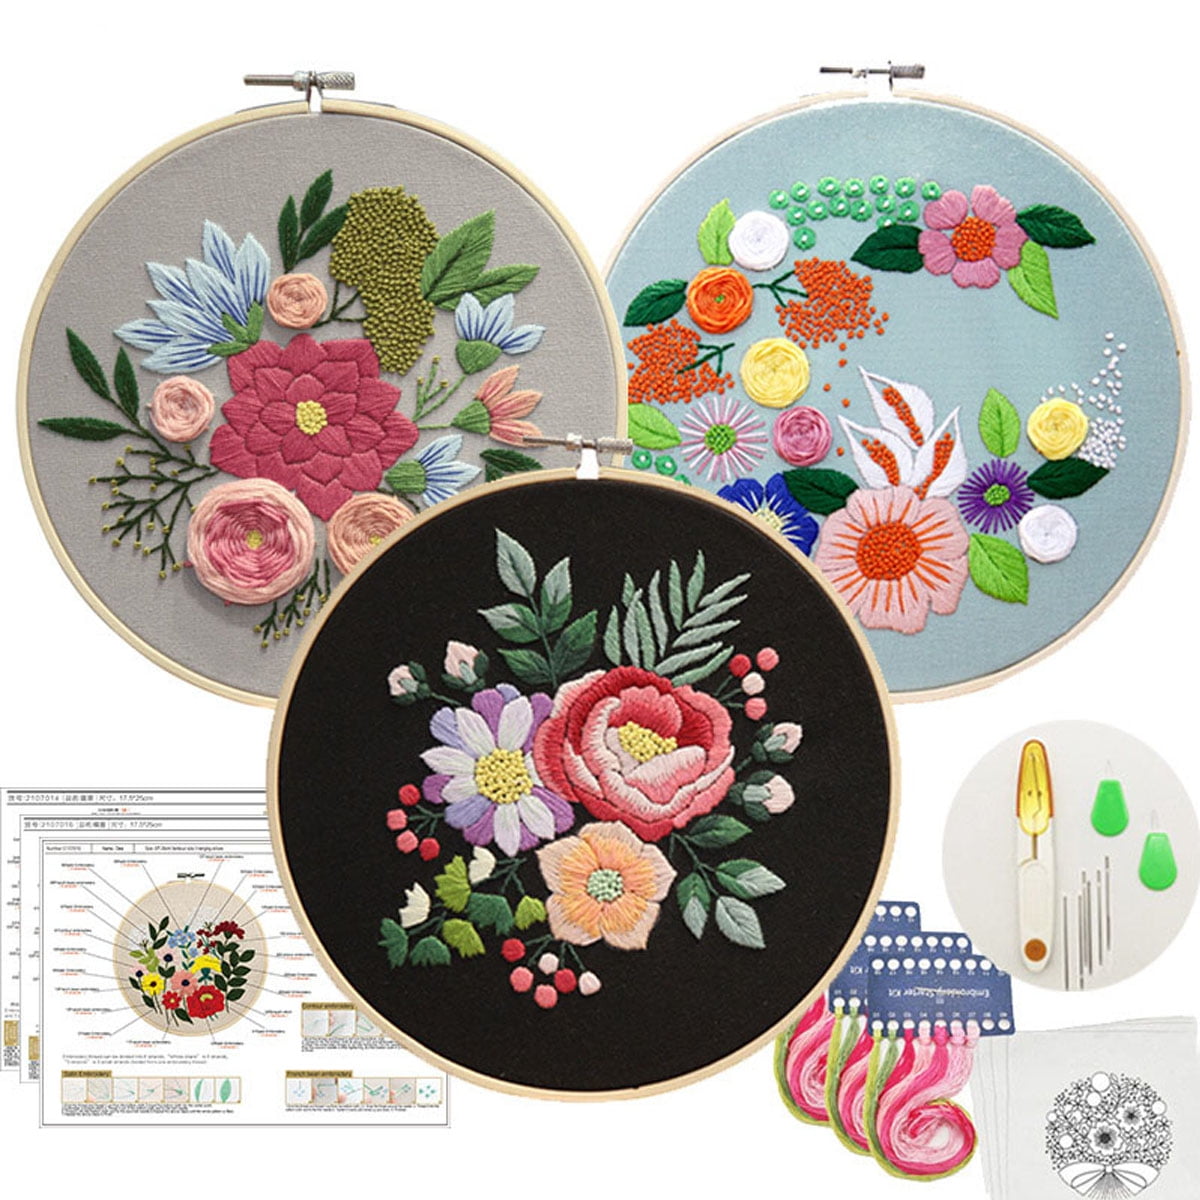 Sivilife Embroidery Kit for Beginners, 3 Sets Stamped Cross Stitch Kits for  Beginner, Floral Pattern Embroidery Starter Kits for Adults with